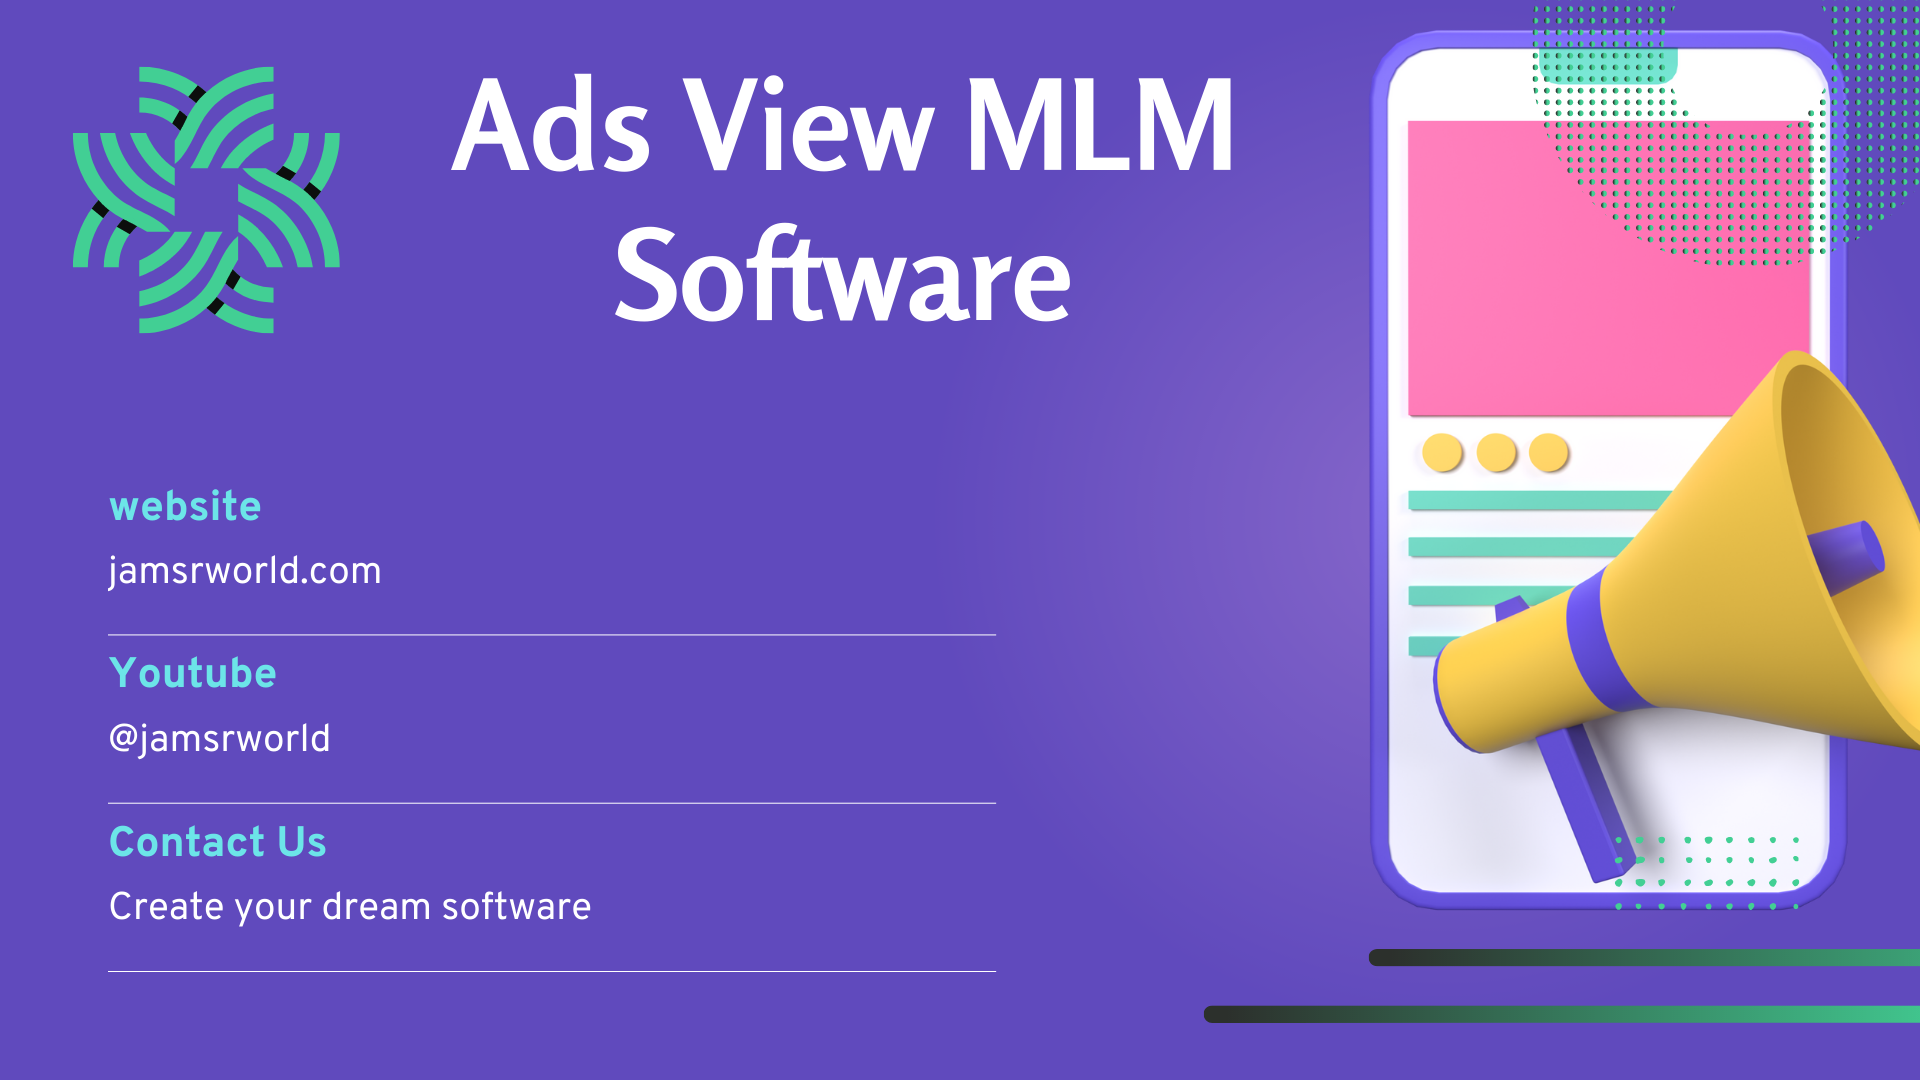 Ads view mlm software | Ads MLM Software